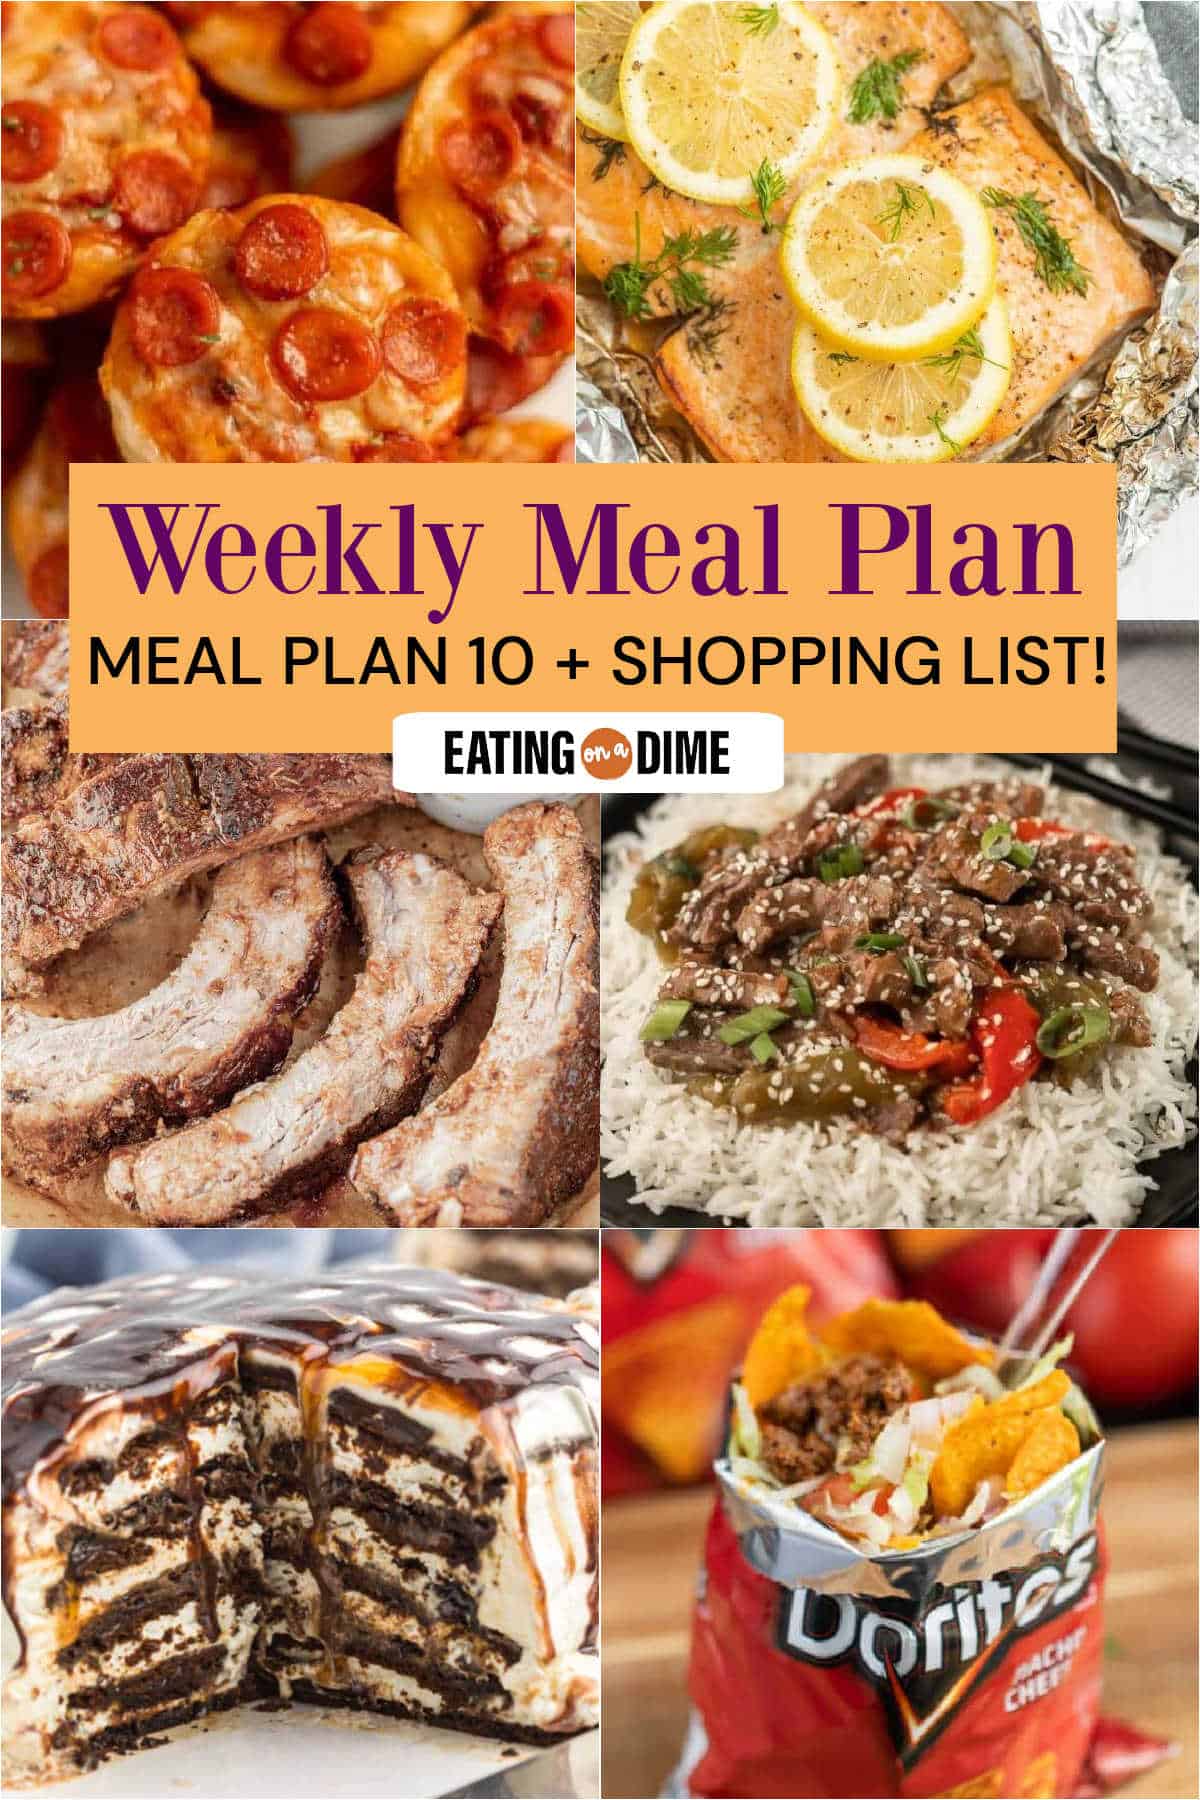 Picture of the meals from this week's meal plan: Pizza Cupcakes, Grilled Salmon in Foil, Slow Cooker Baby Back Ribs, Crock Pot Pepper Steak, Ice Cream Cake and Walking Tacos. 
